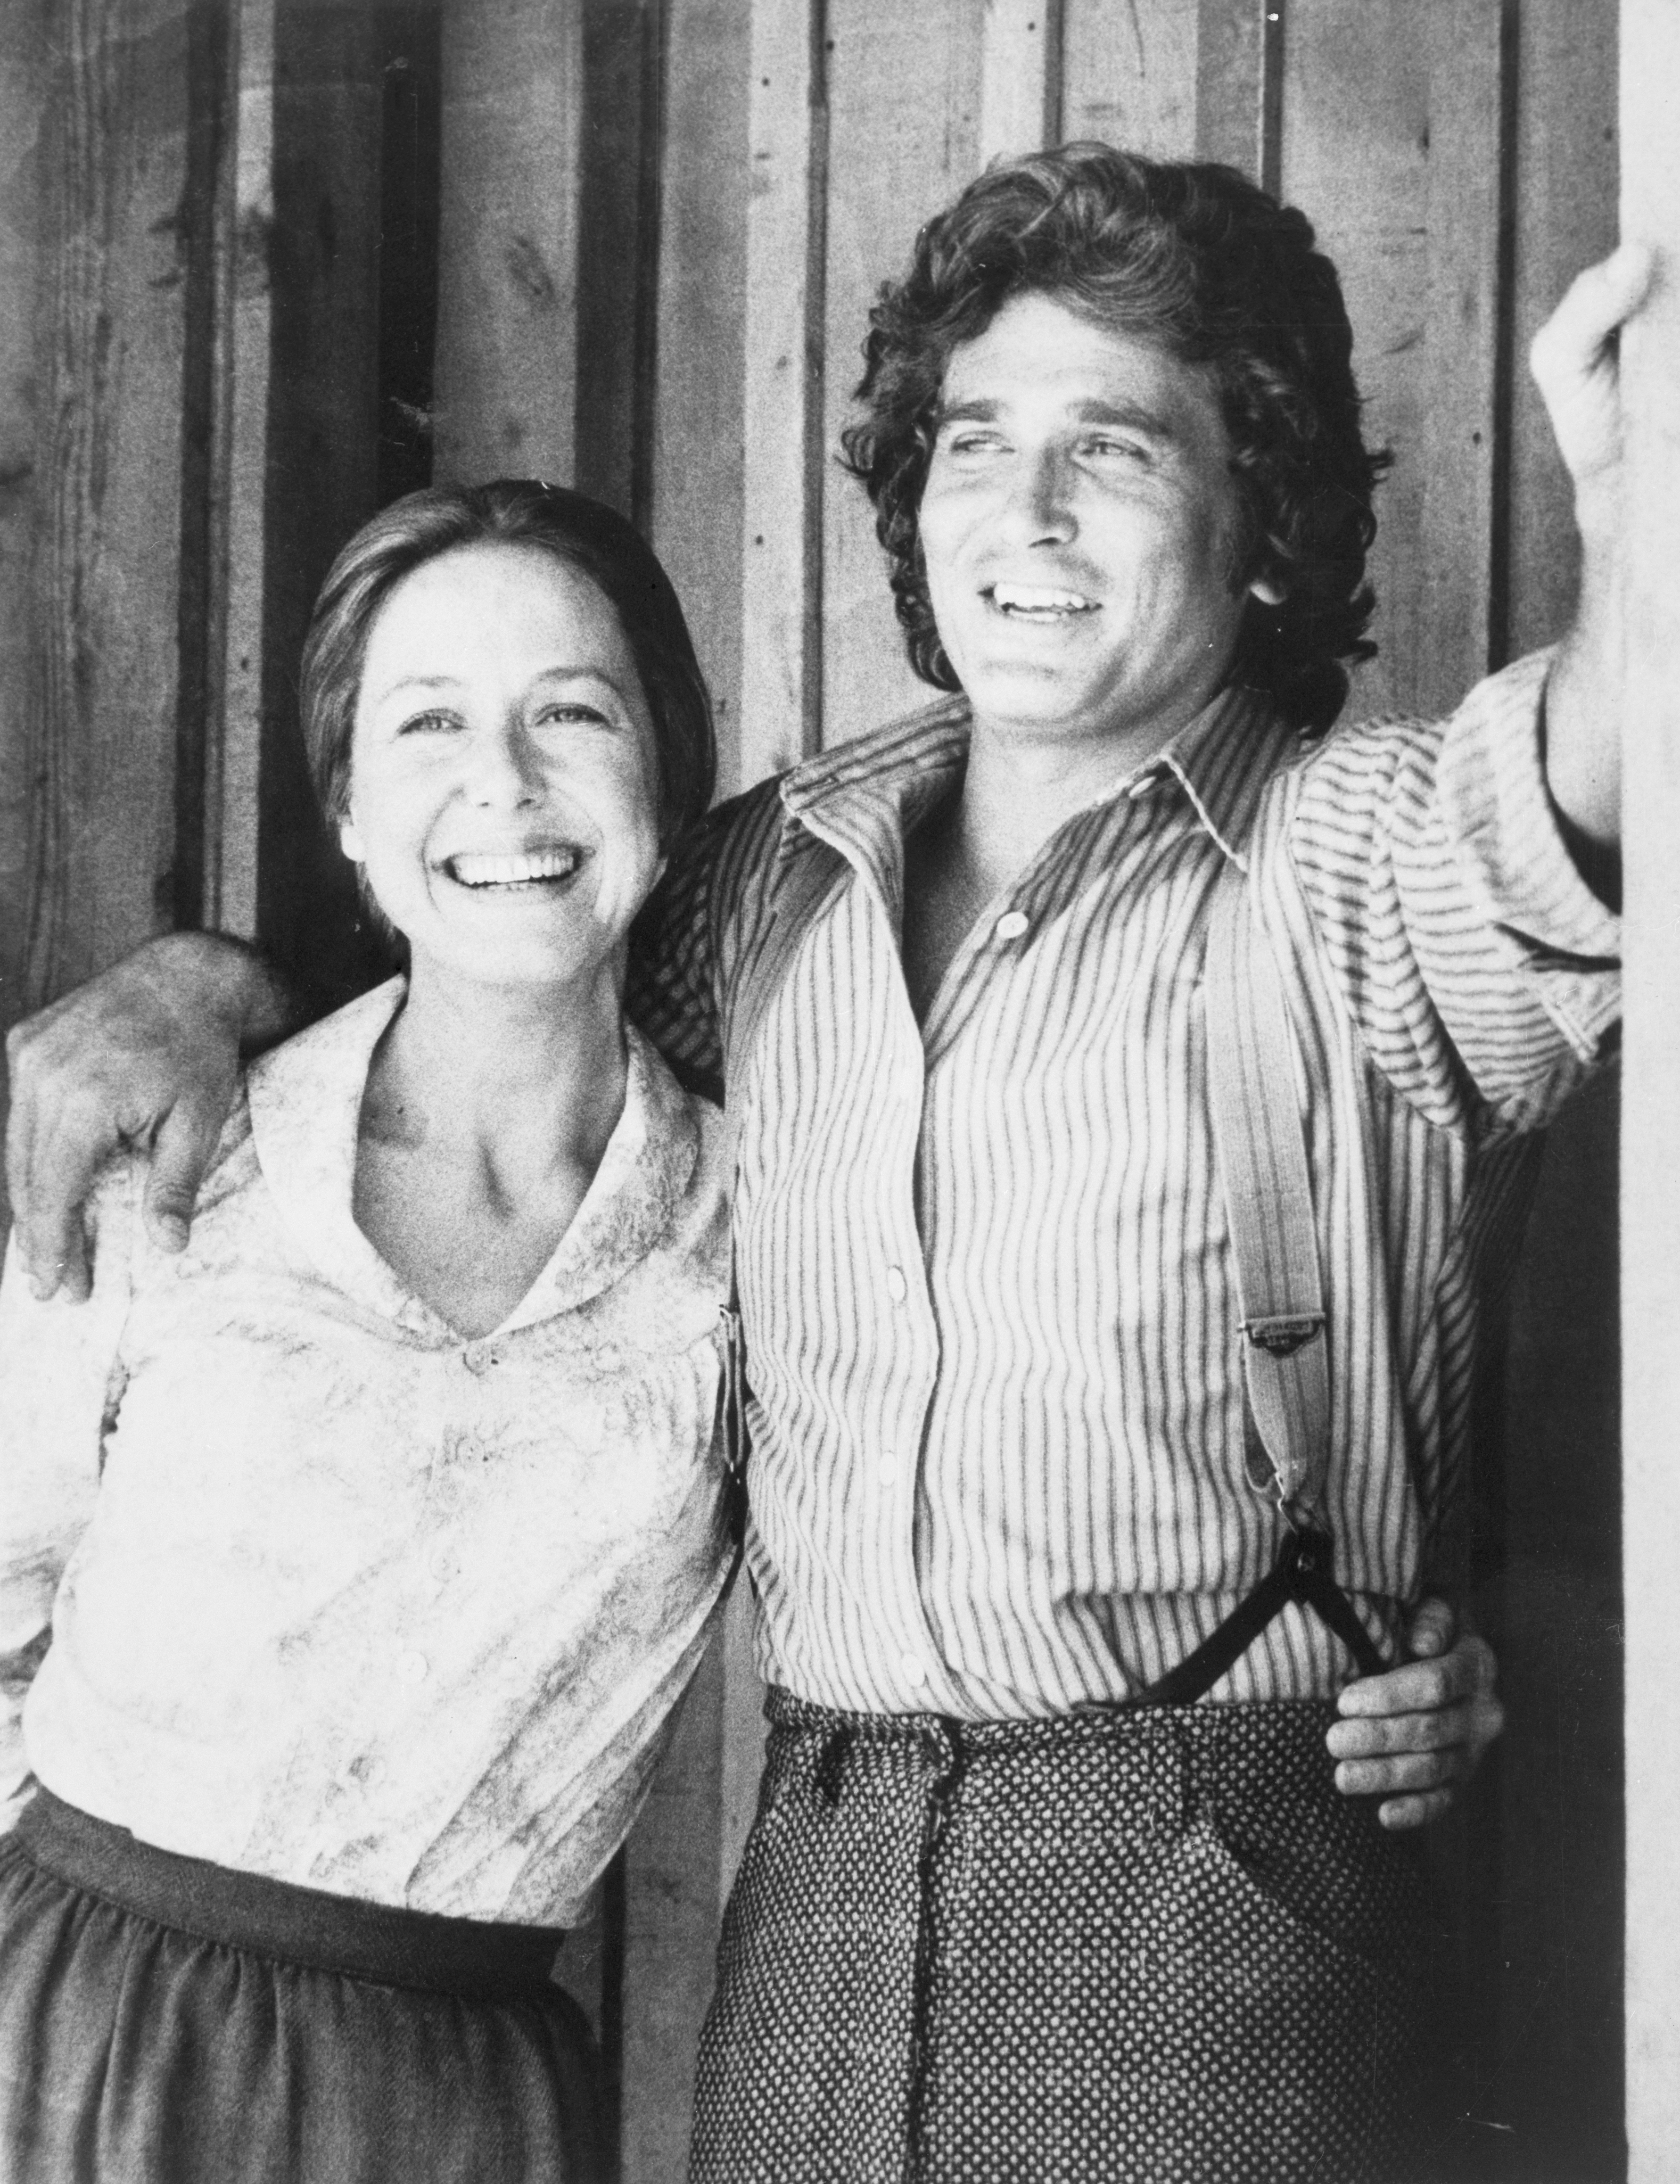 Karen Grassle and Michael Landon in "Little House on the Prairie" in an undated photo | Source: Getty Images